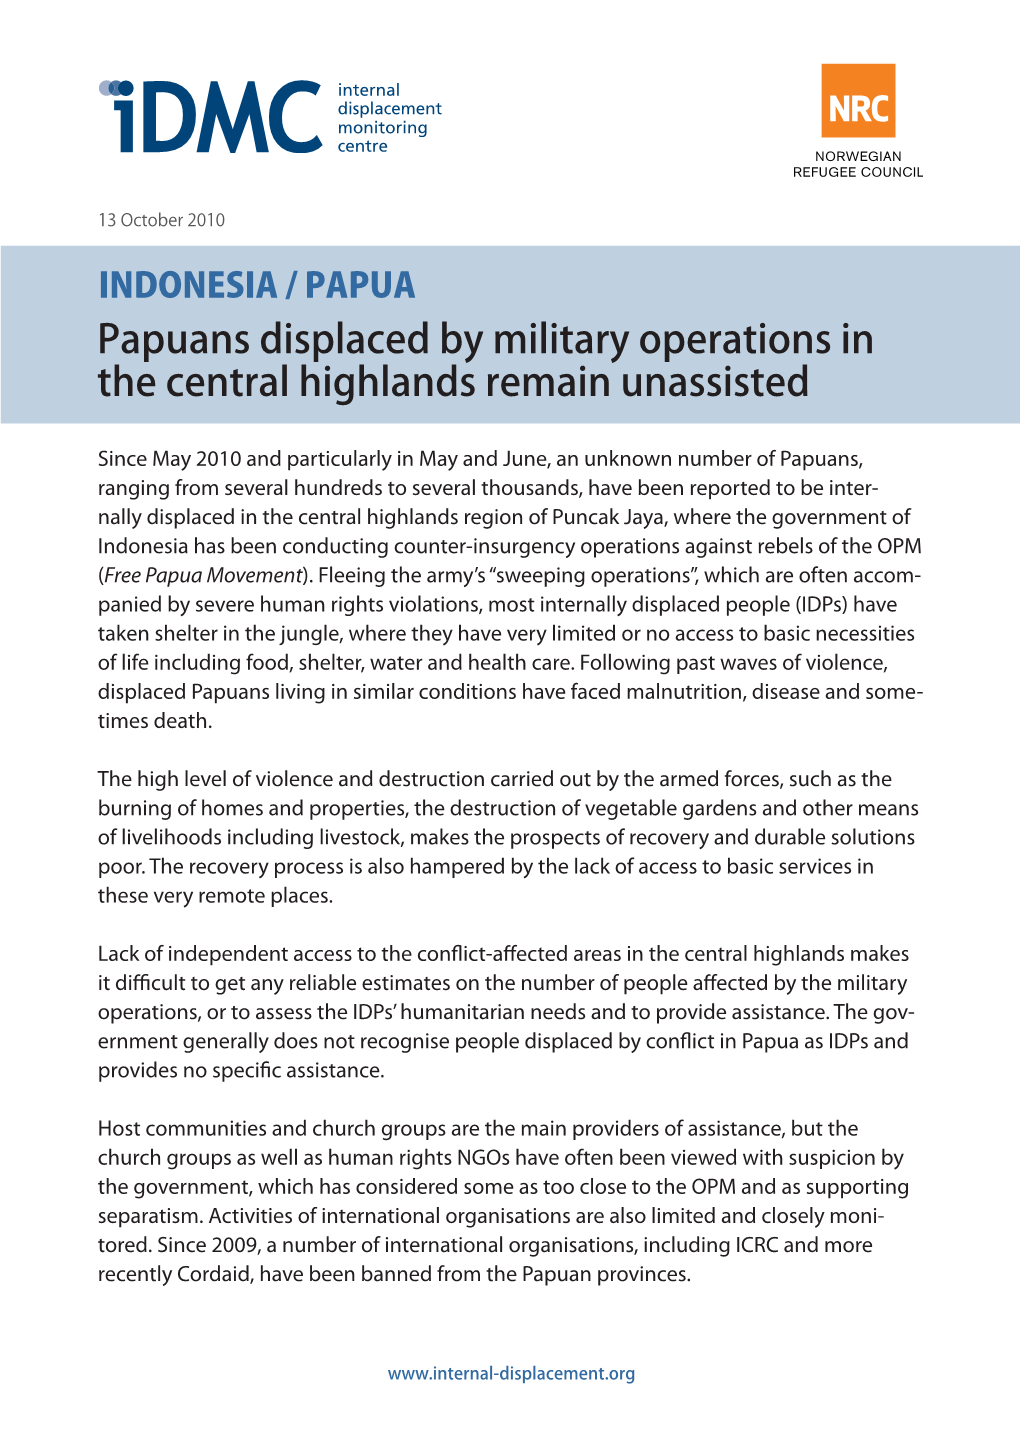 Papuans Displaced by Military Operations in the Central Highlands Remain Unassisted